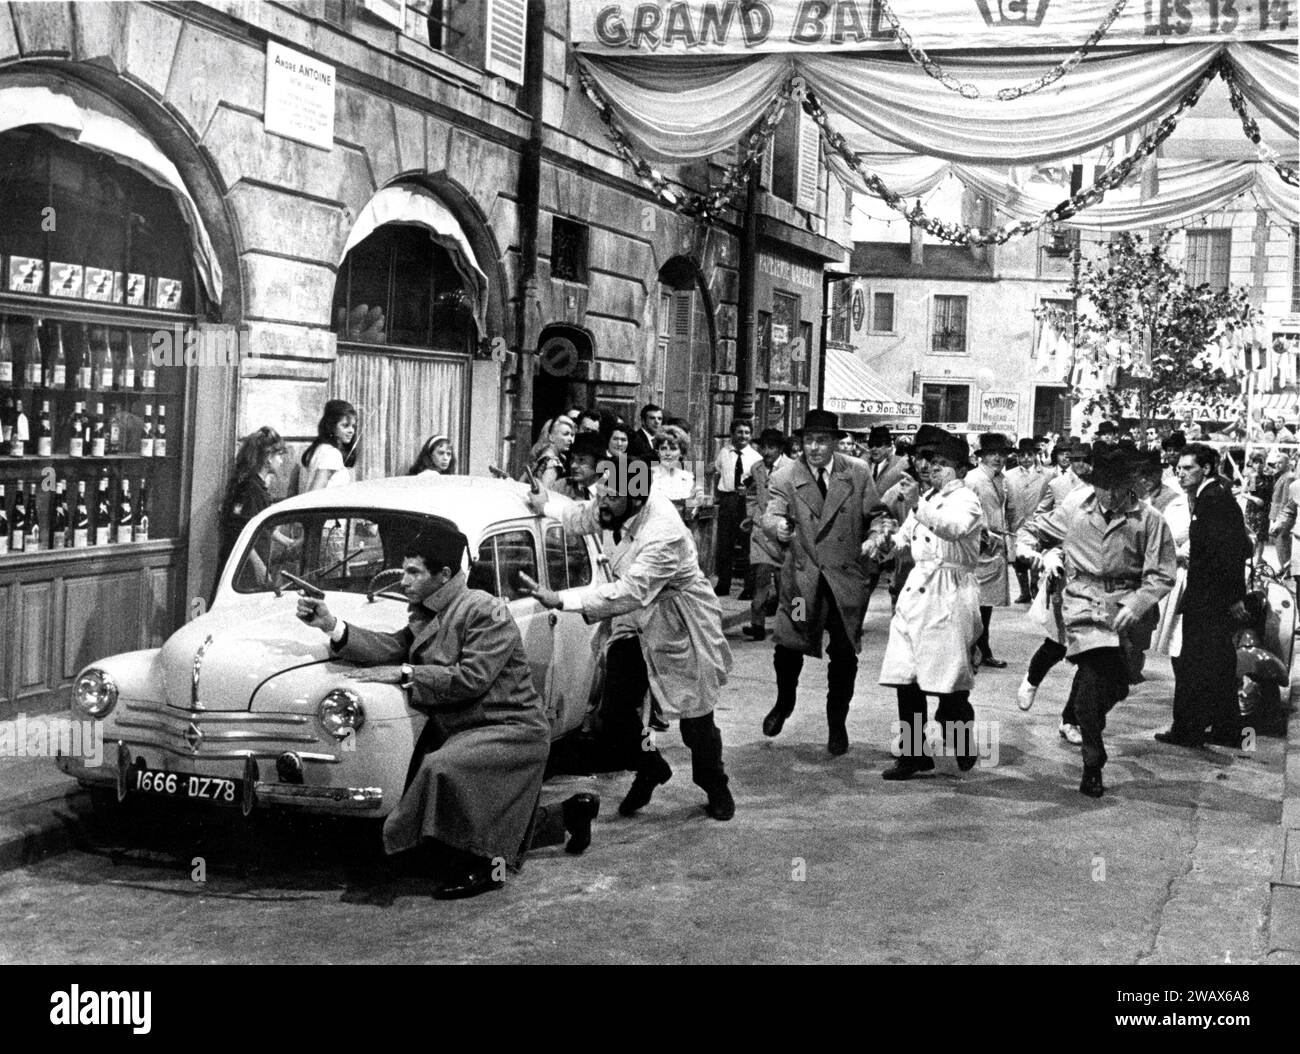 Street scene in PARIS WHEN IT SIZZLES 1964 director RICHARD QUINE story Julien Duvivier and Henri Jeanson screenplay George Axelrod Miss Hepburn's wardrobe Hubert de Givenchy Richard Quine Productions / Charleston Enterprises / George Axelrod Productions / Paramount Pictures Stock Photo